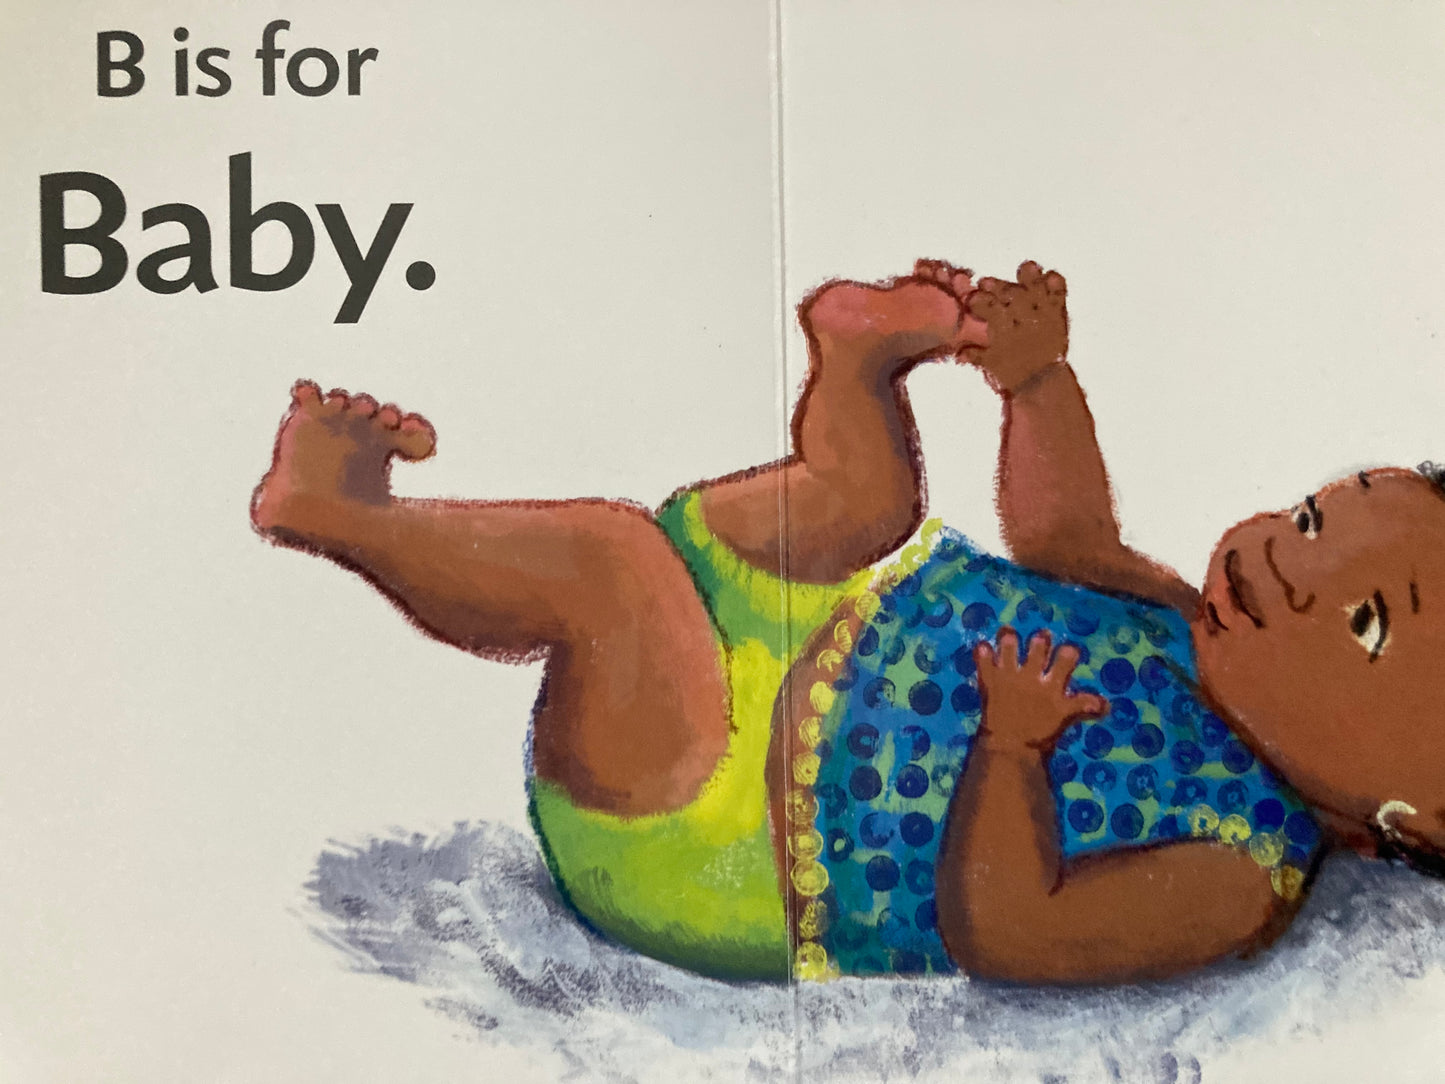 Board Book, Baby - B IS FOR BABY